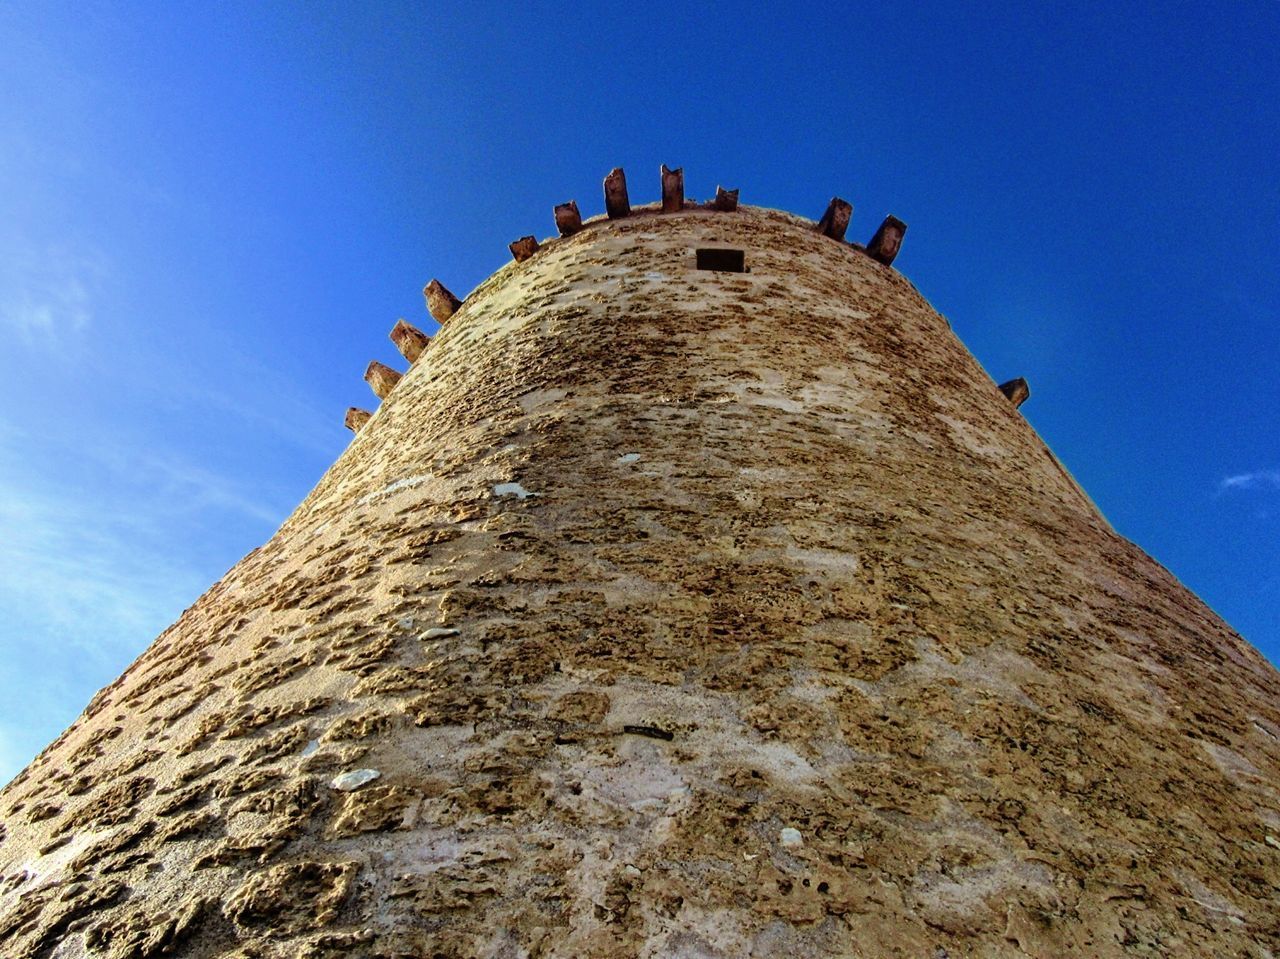 LOW ANGLE VIEW OF CASTLE TOWER AGAINST BLUE SKY